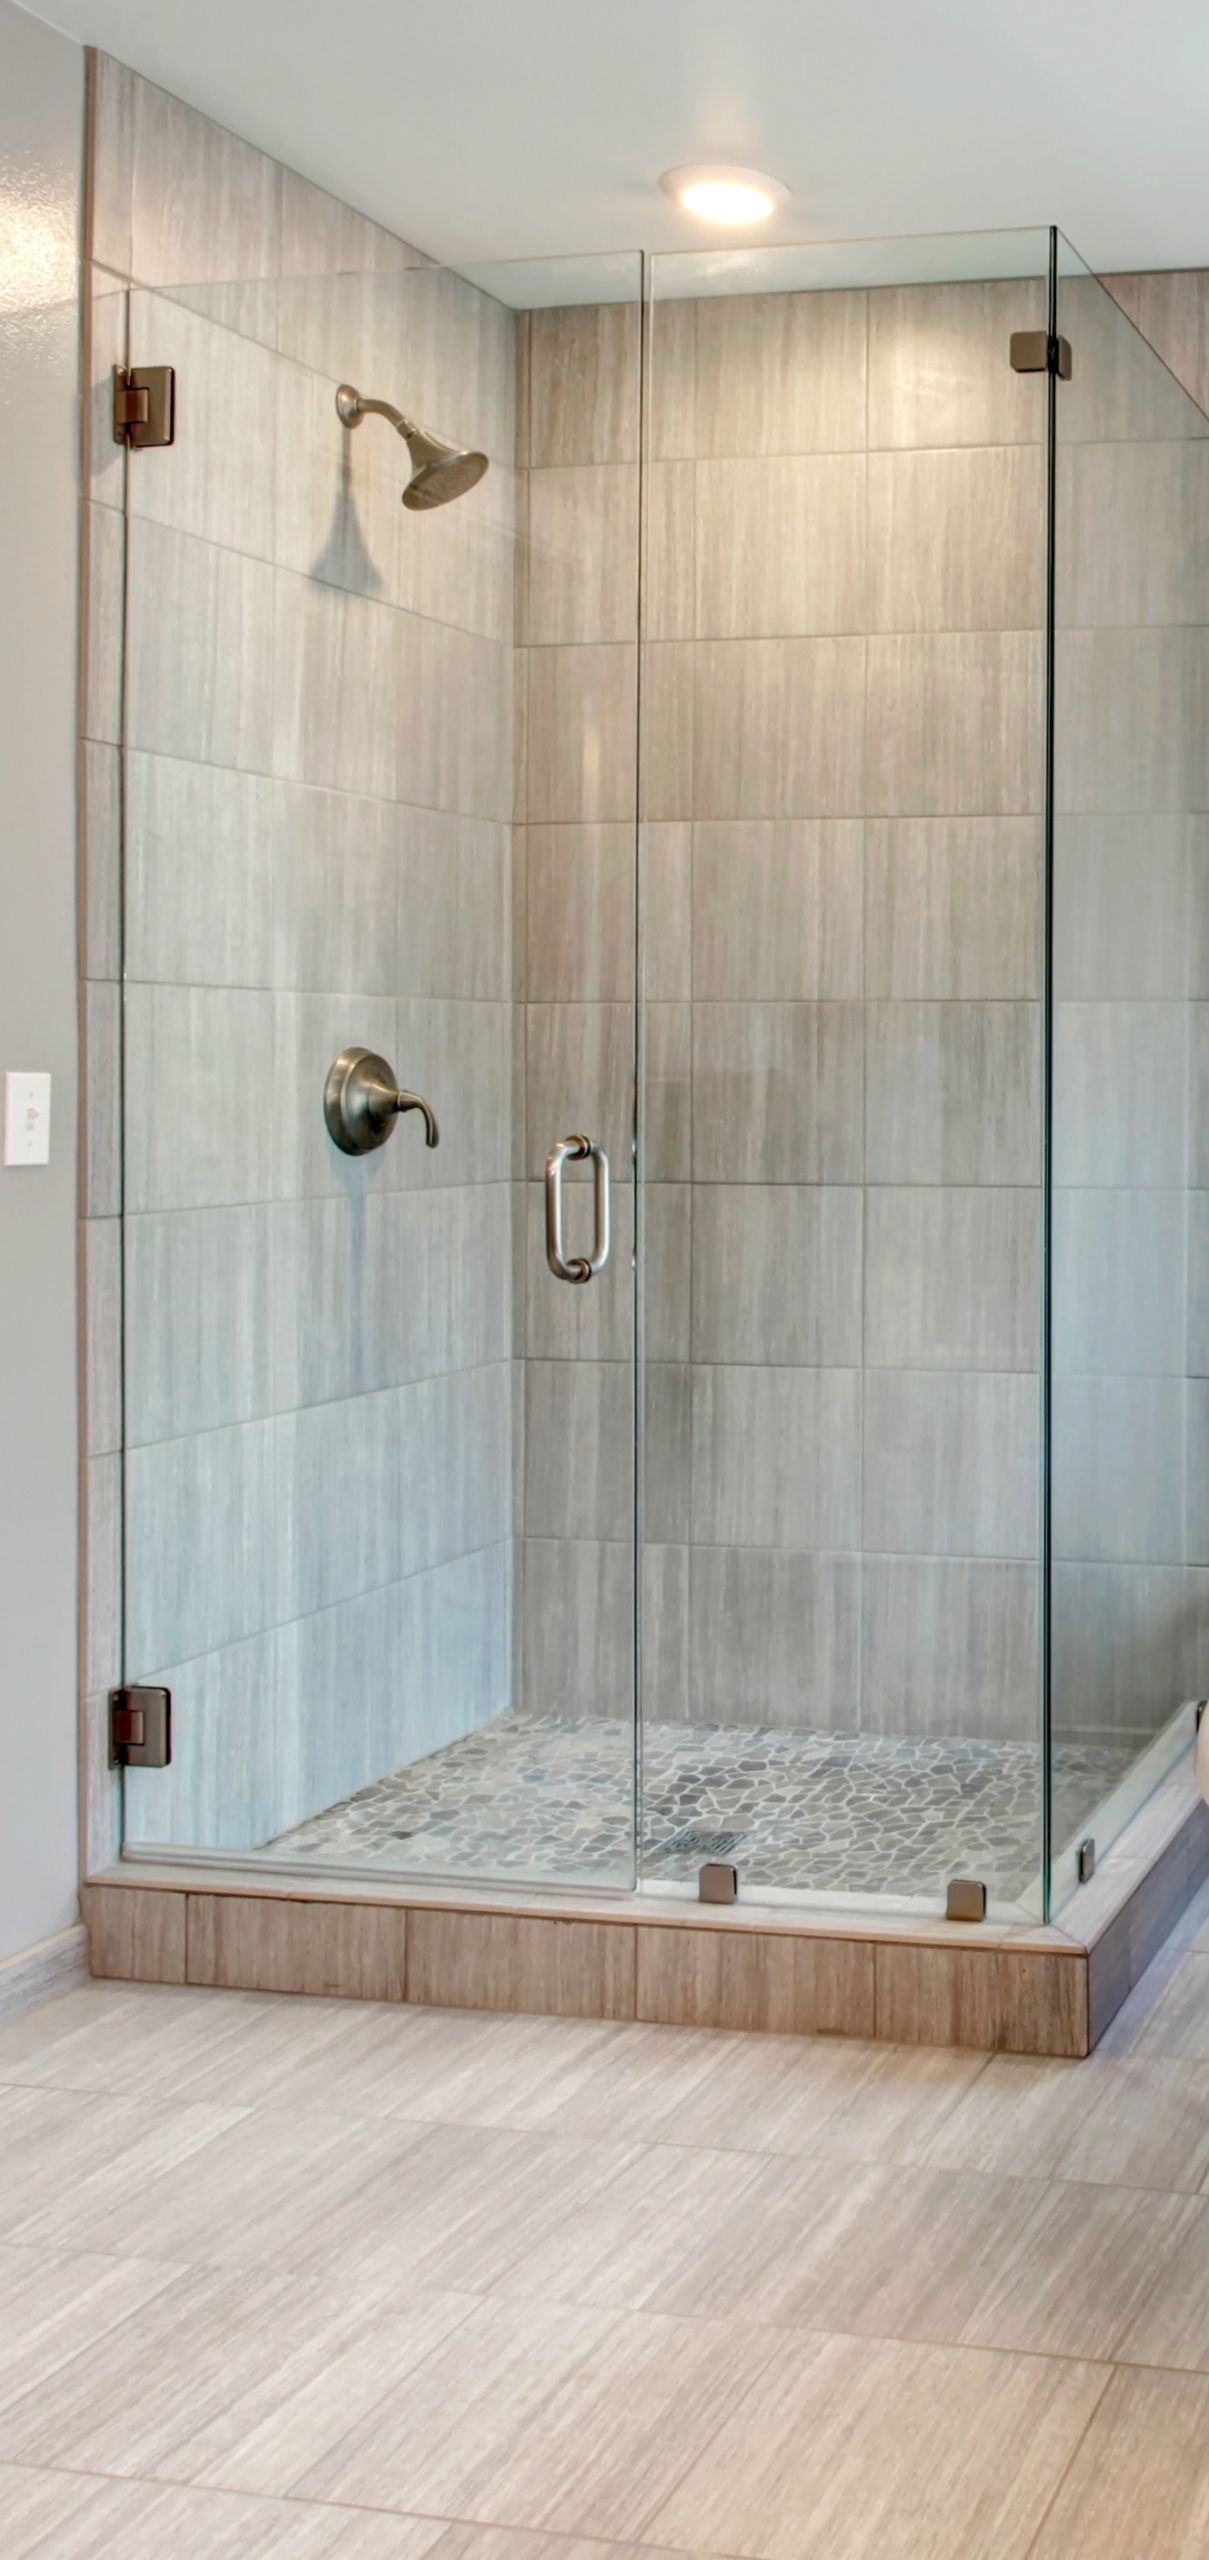 Shower Ideas For Small Bathroom
 Bathroom Interesting Small Shower Stalls With Fabulous